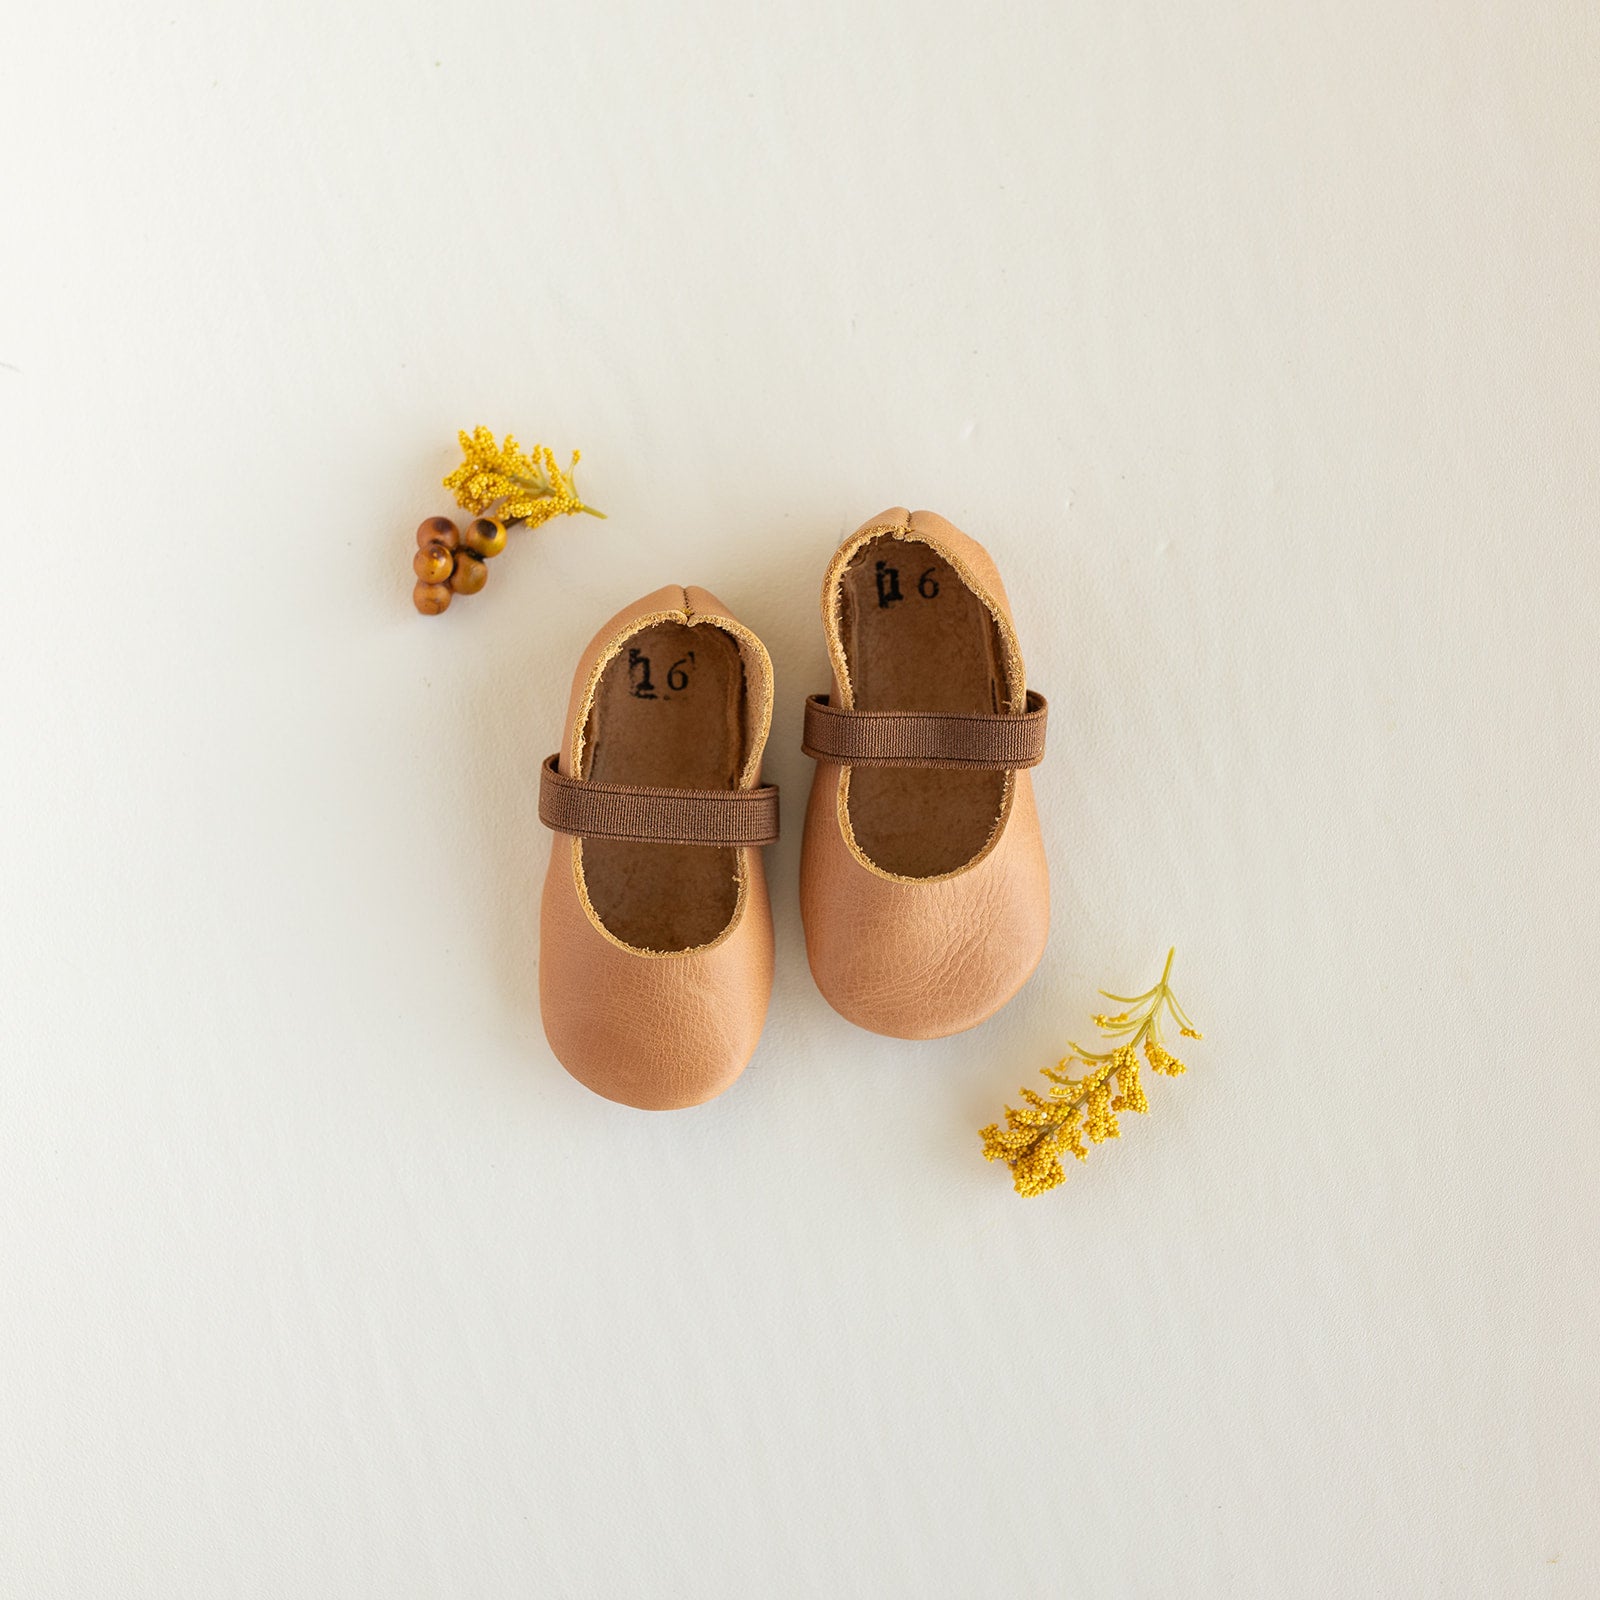 Slip on, soft sole baby Mary Jane with elastic band in a cognac leather.